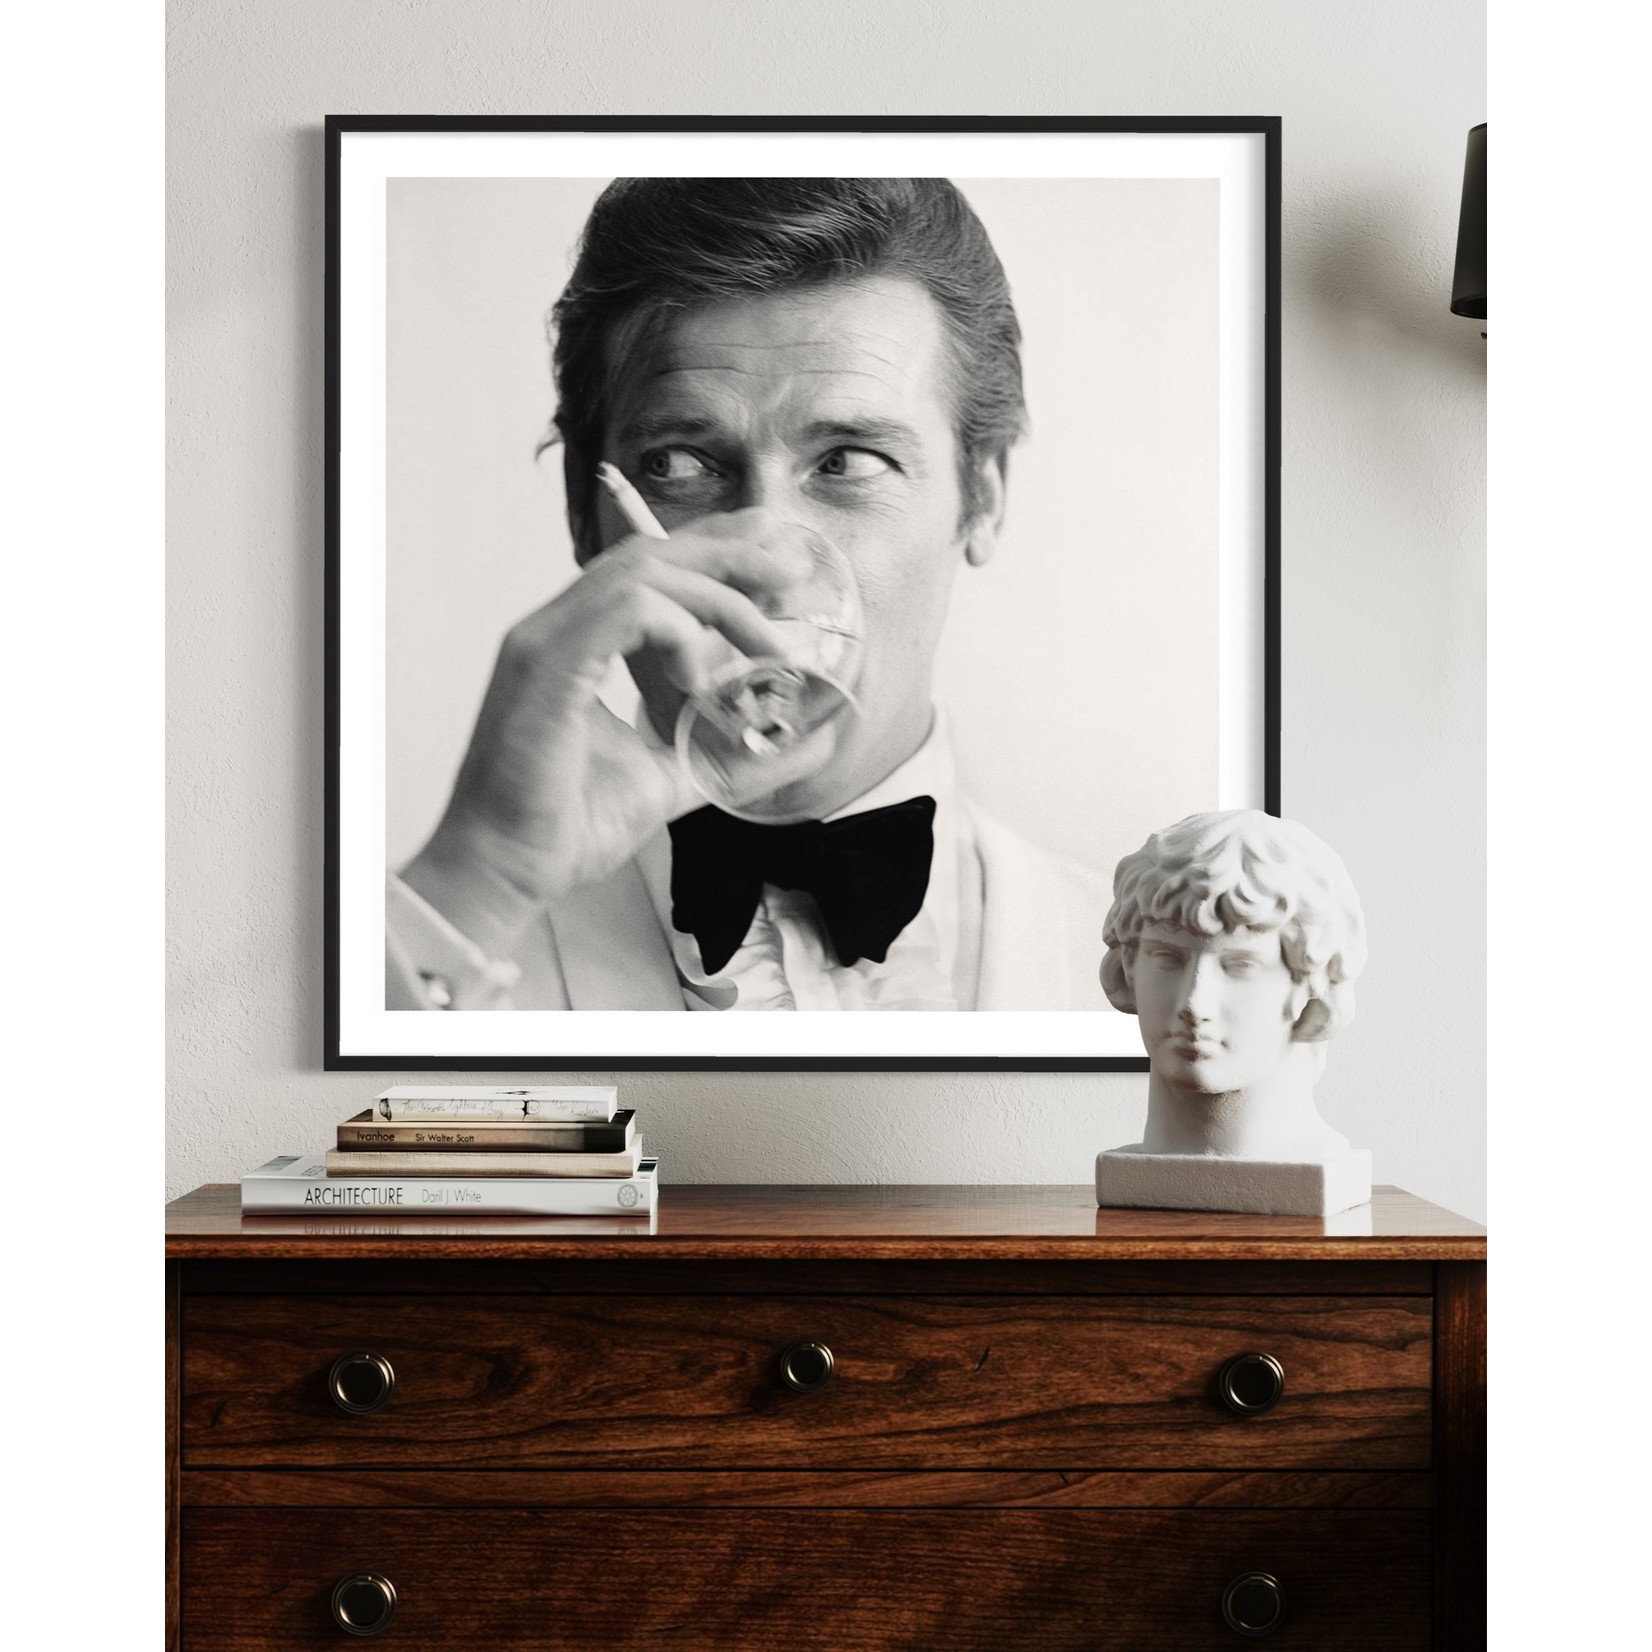 Framed Print on Rag Paper: Shaken Not Stirred Photo by Peter Ruck via Getty Images Gallery